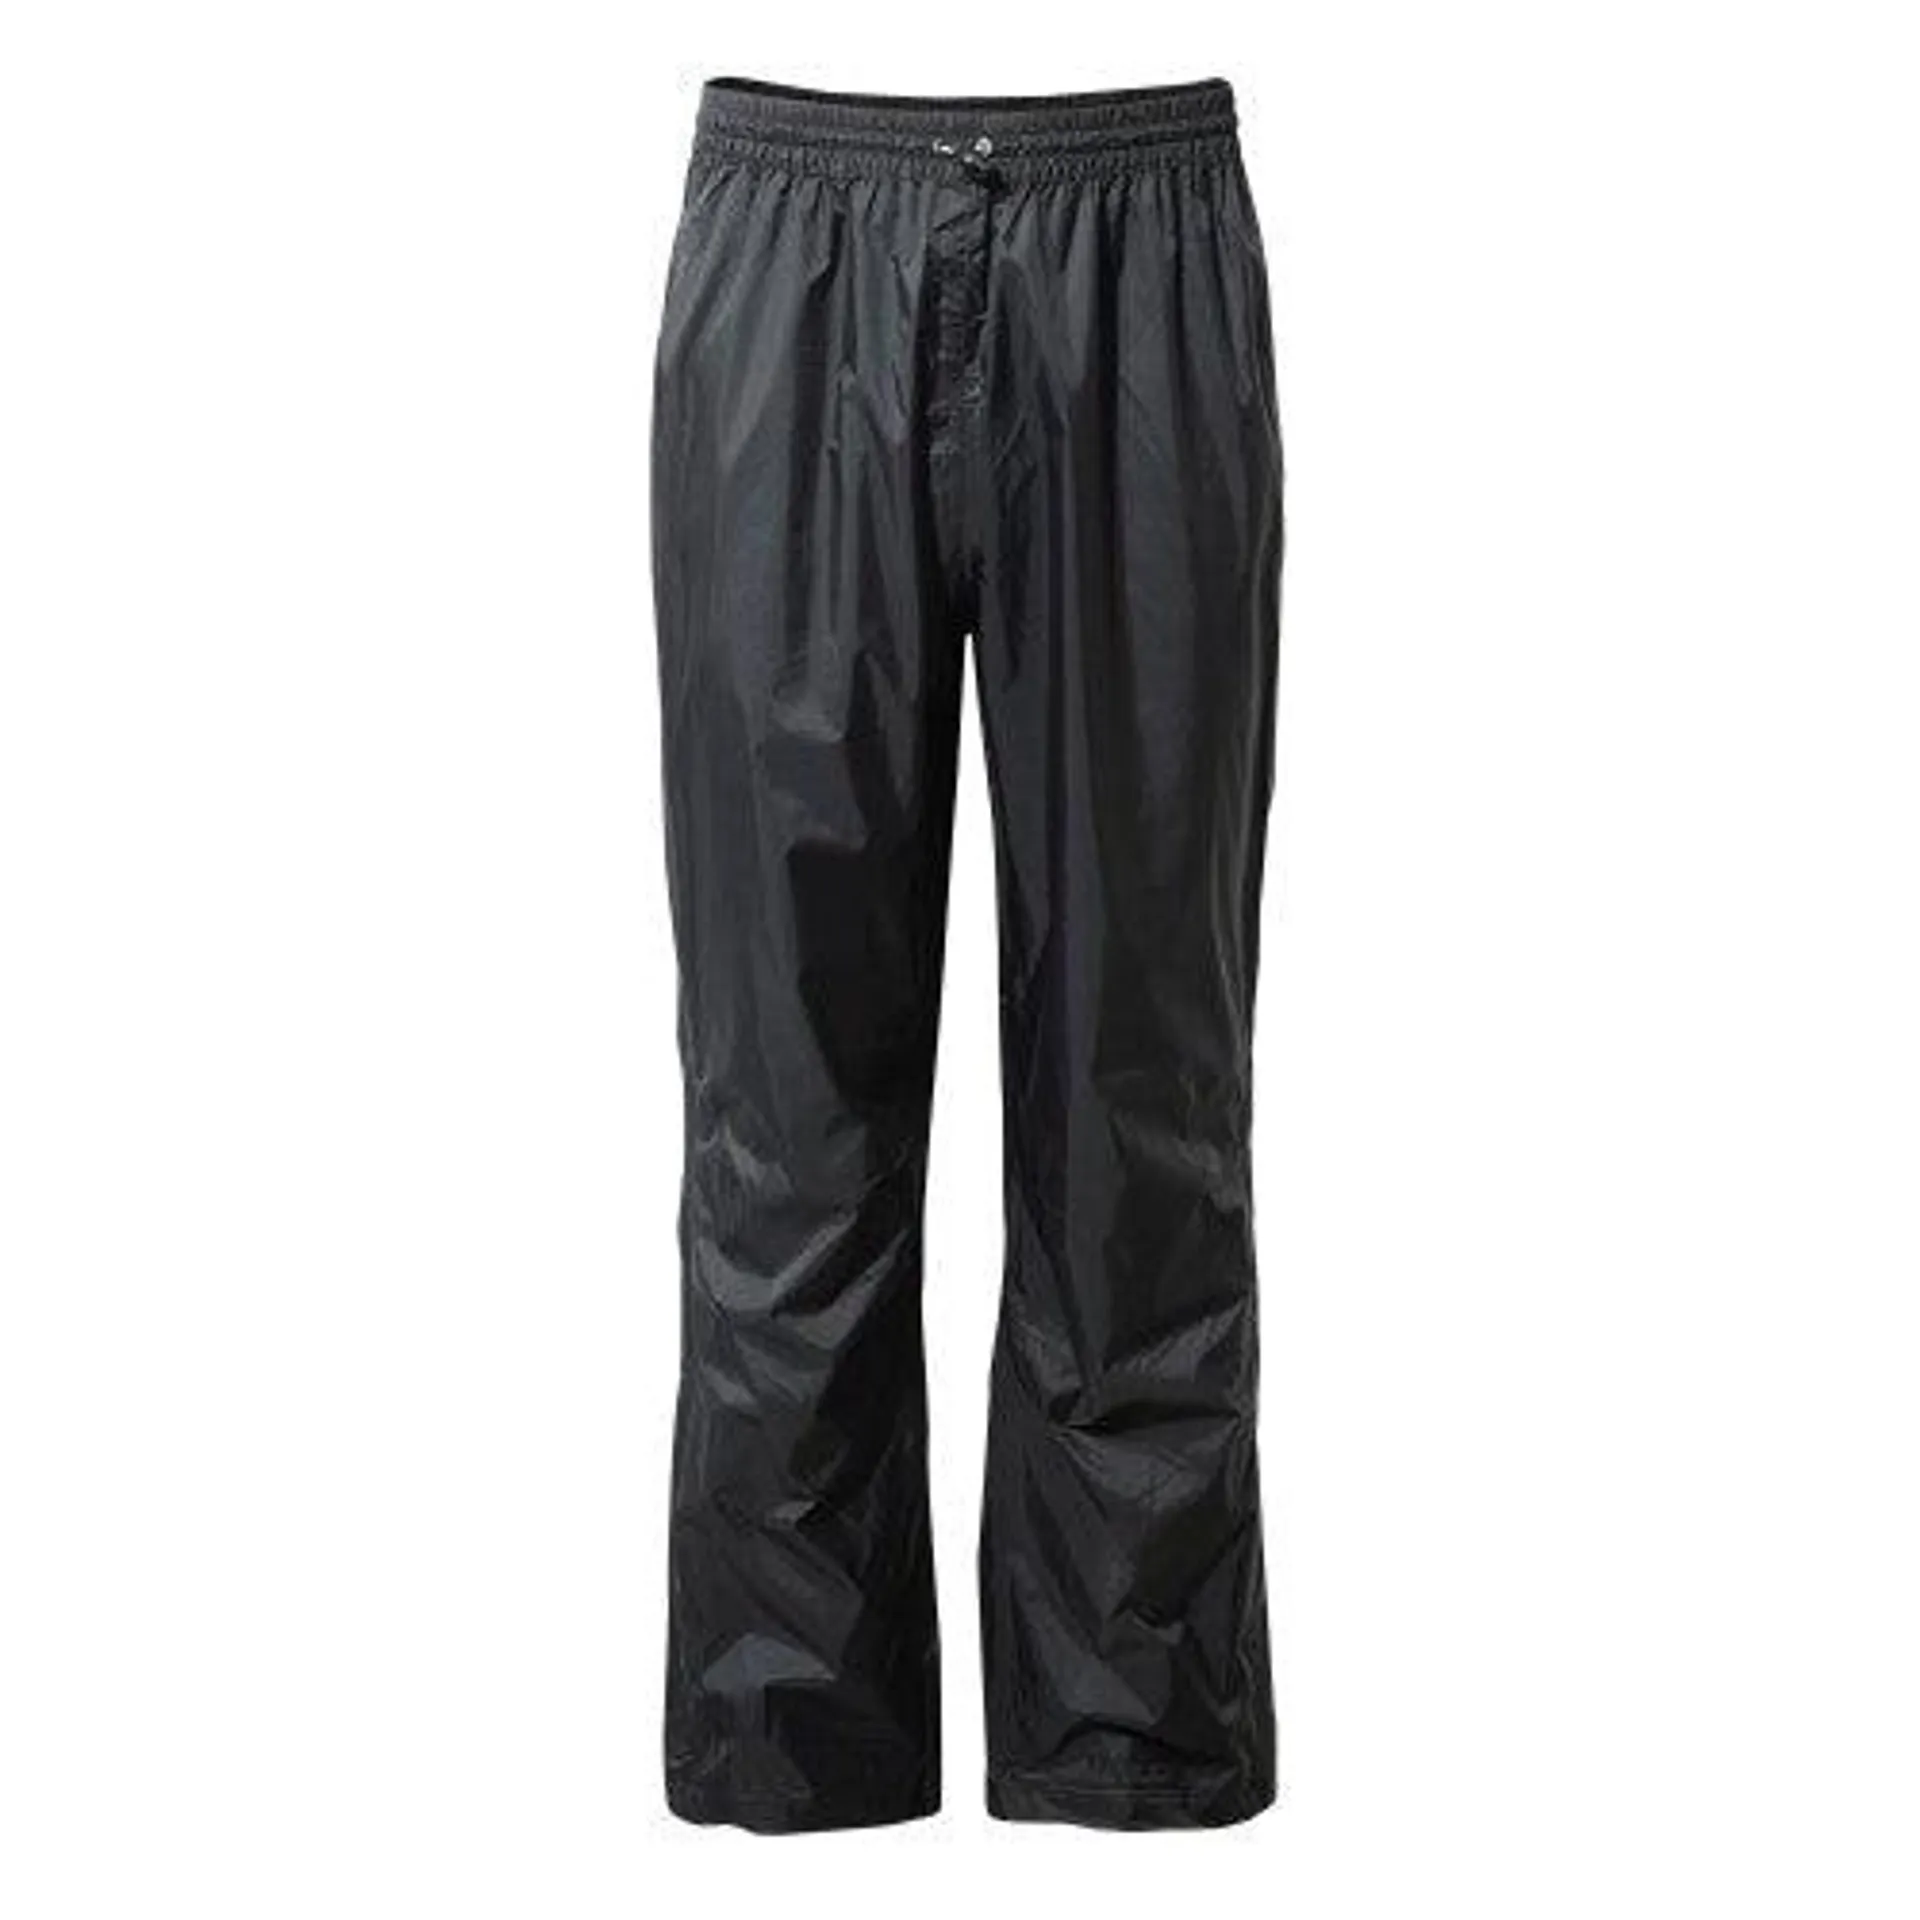 Craghoppers Unisex Ascent Overtrousers